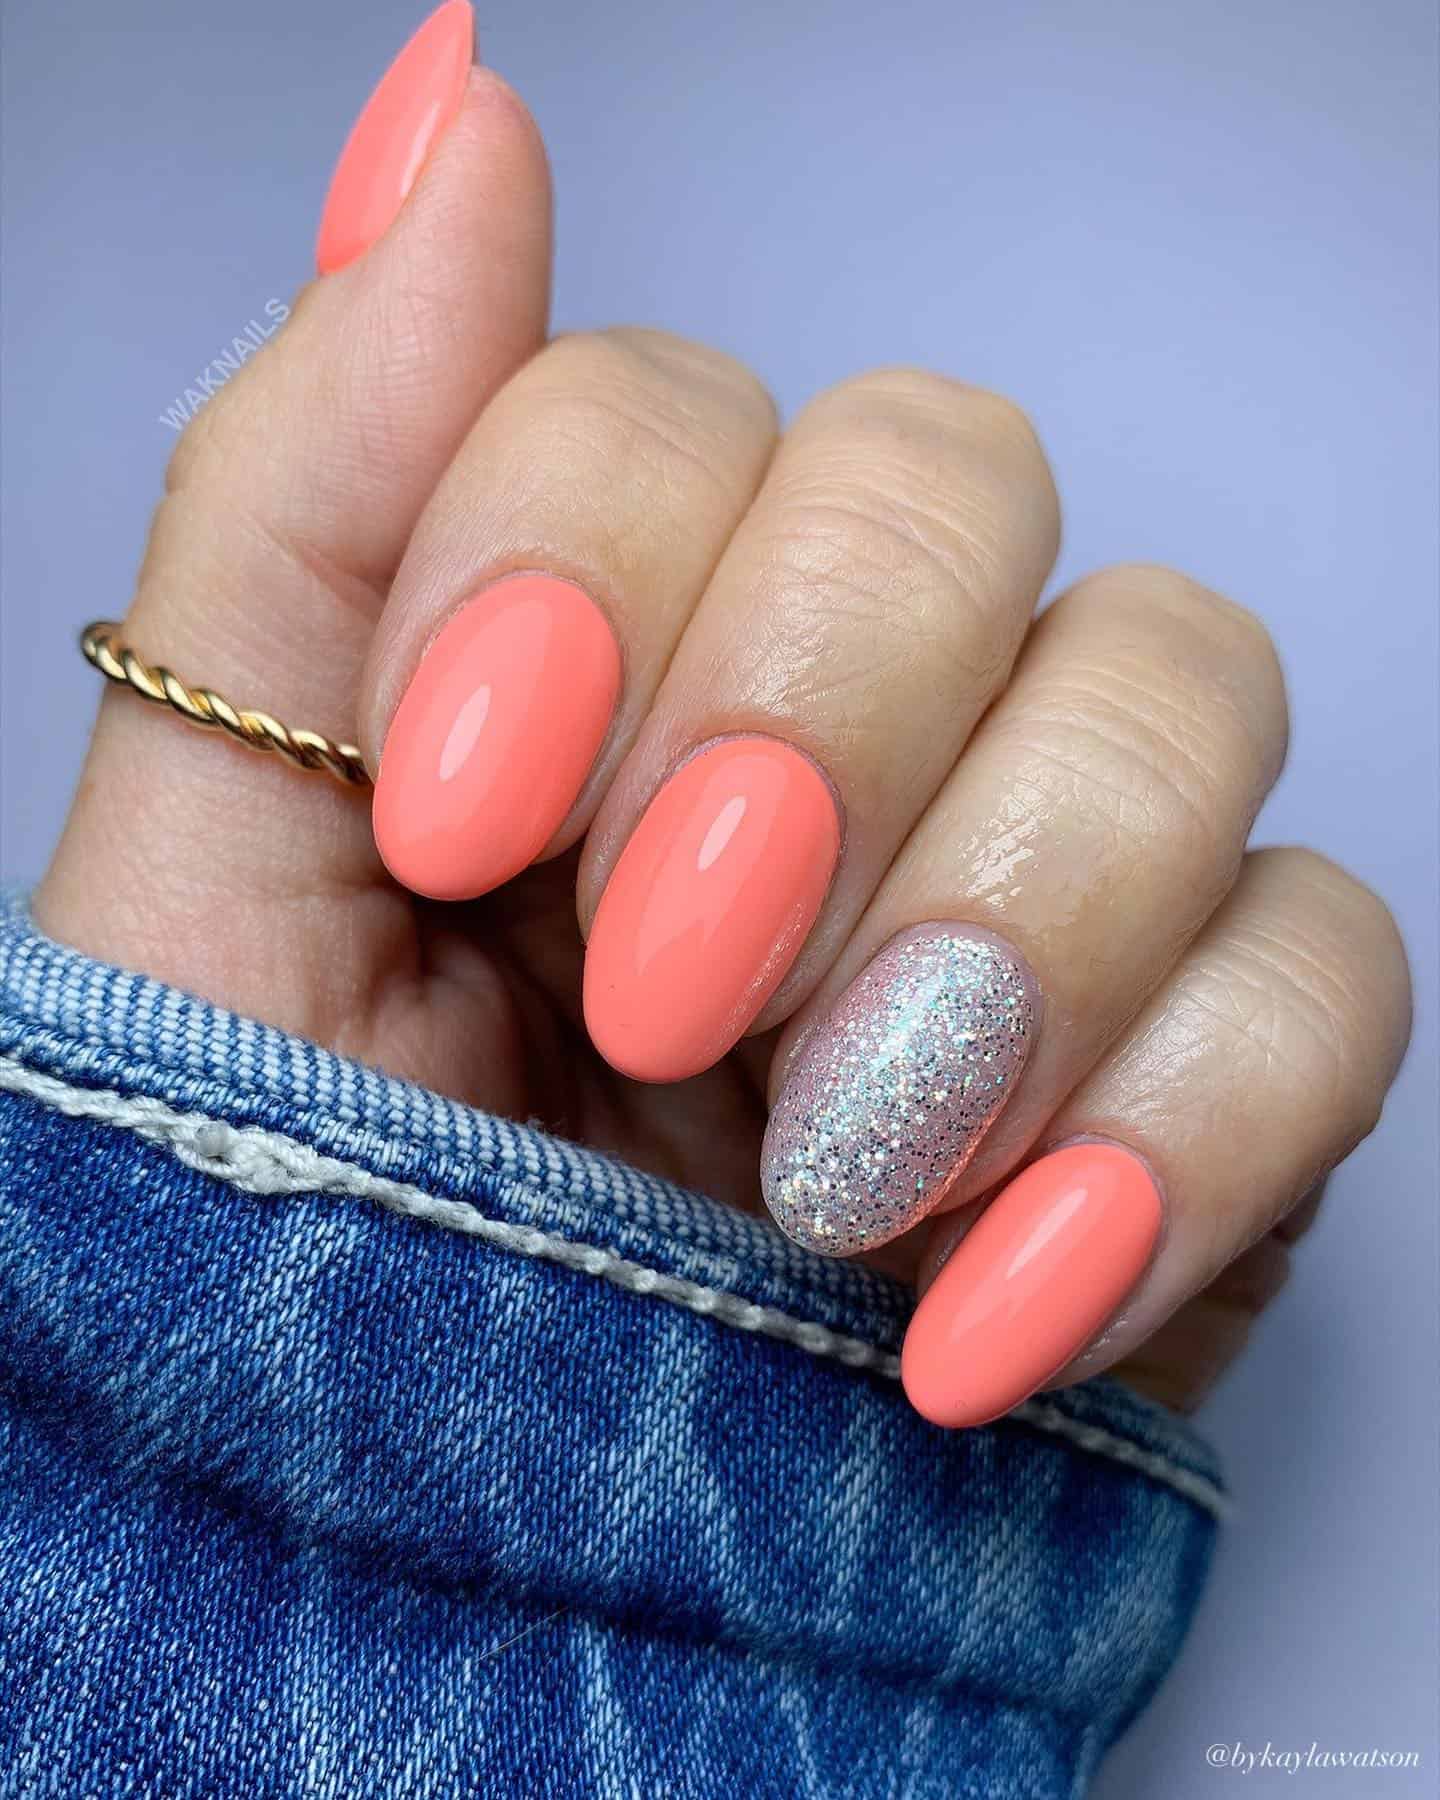 A hand with short round nails painted coral peach with one silver glitter accent nail